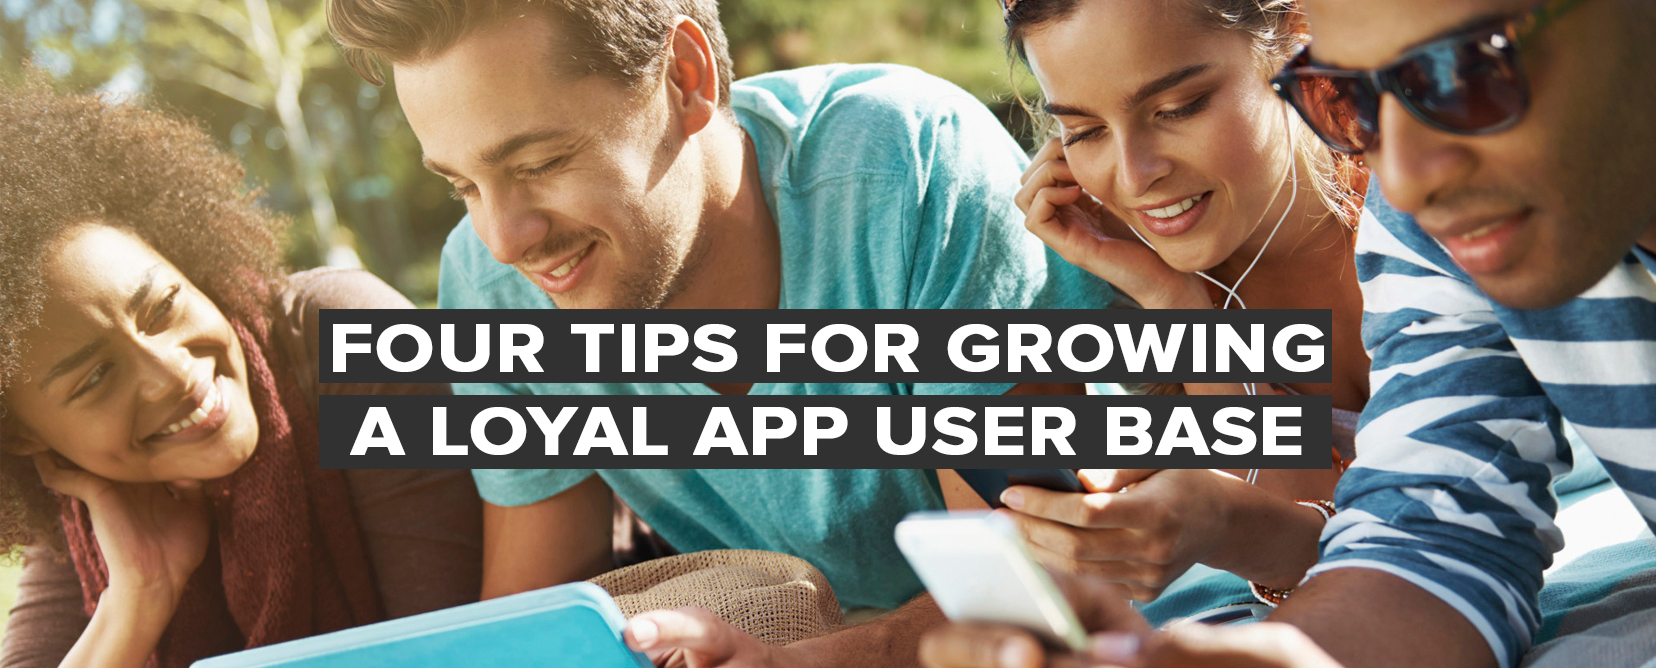 Four Tips for Growing a Loyal App User Base